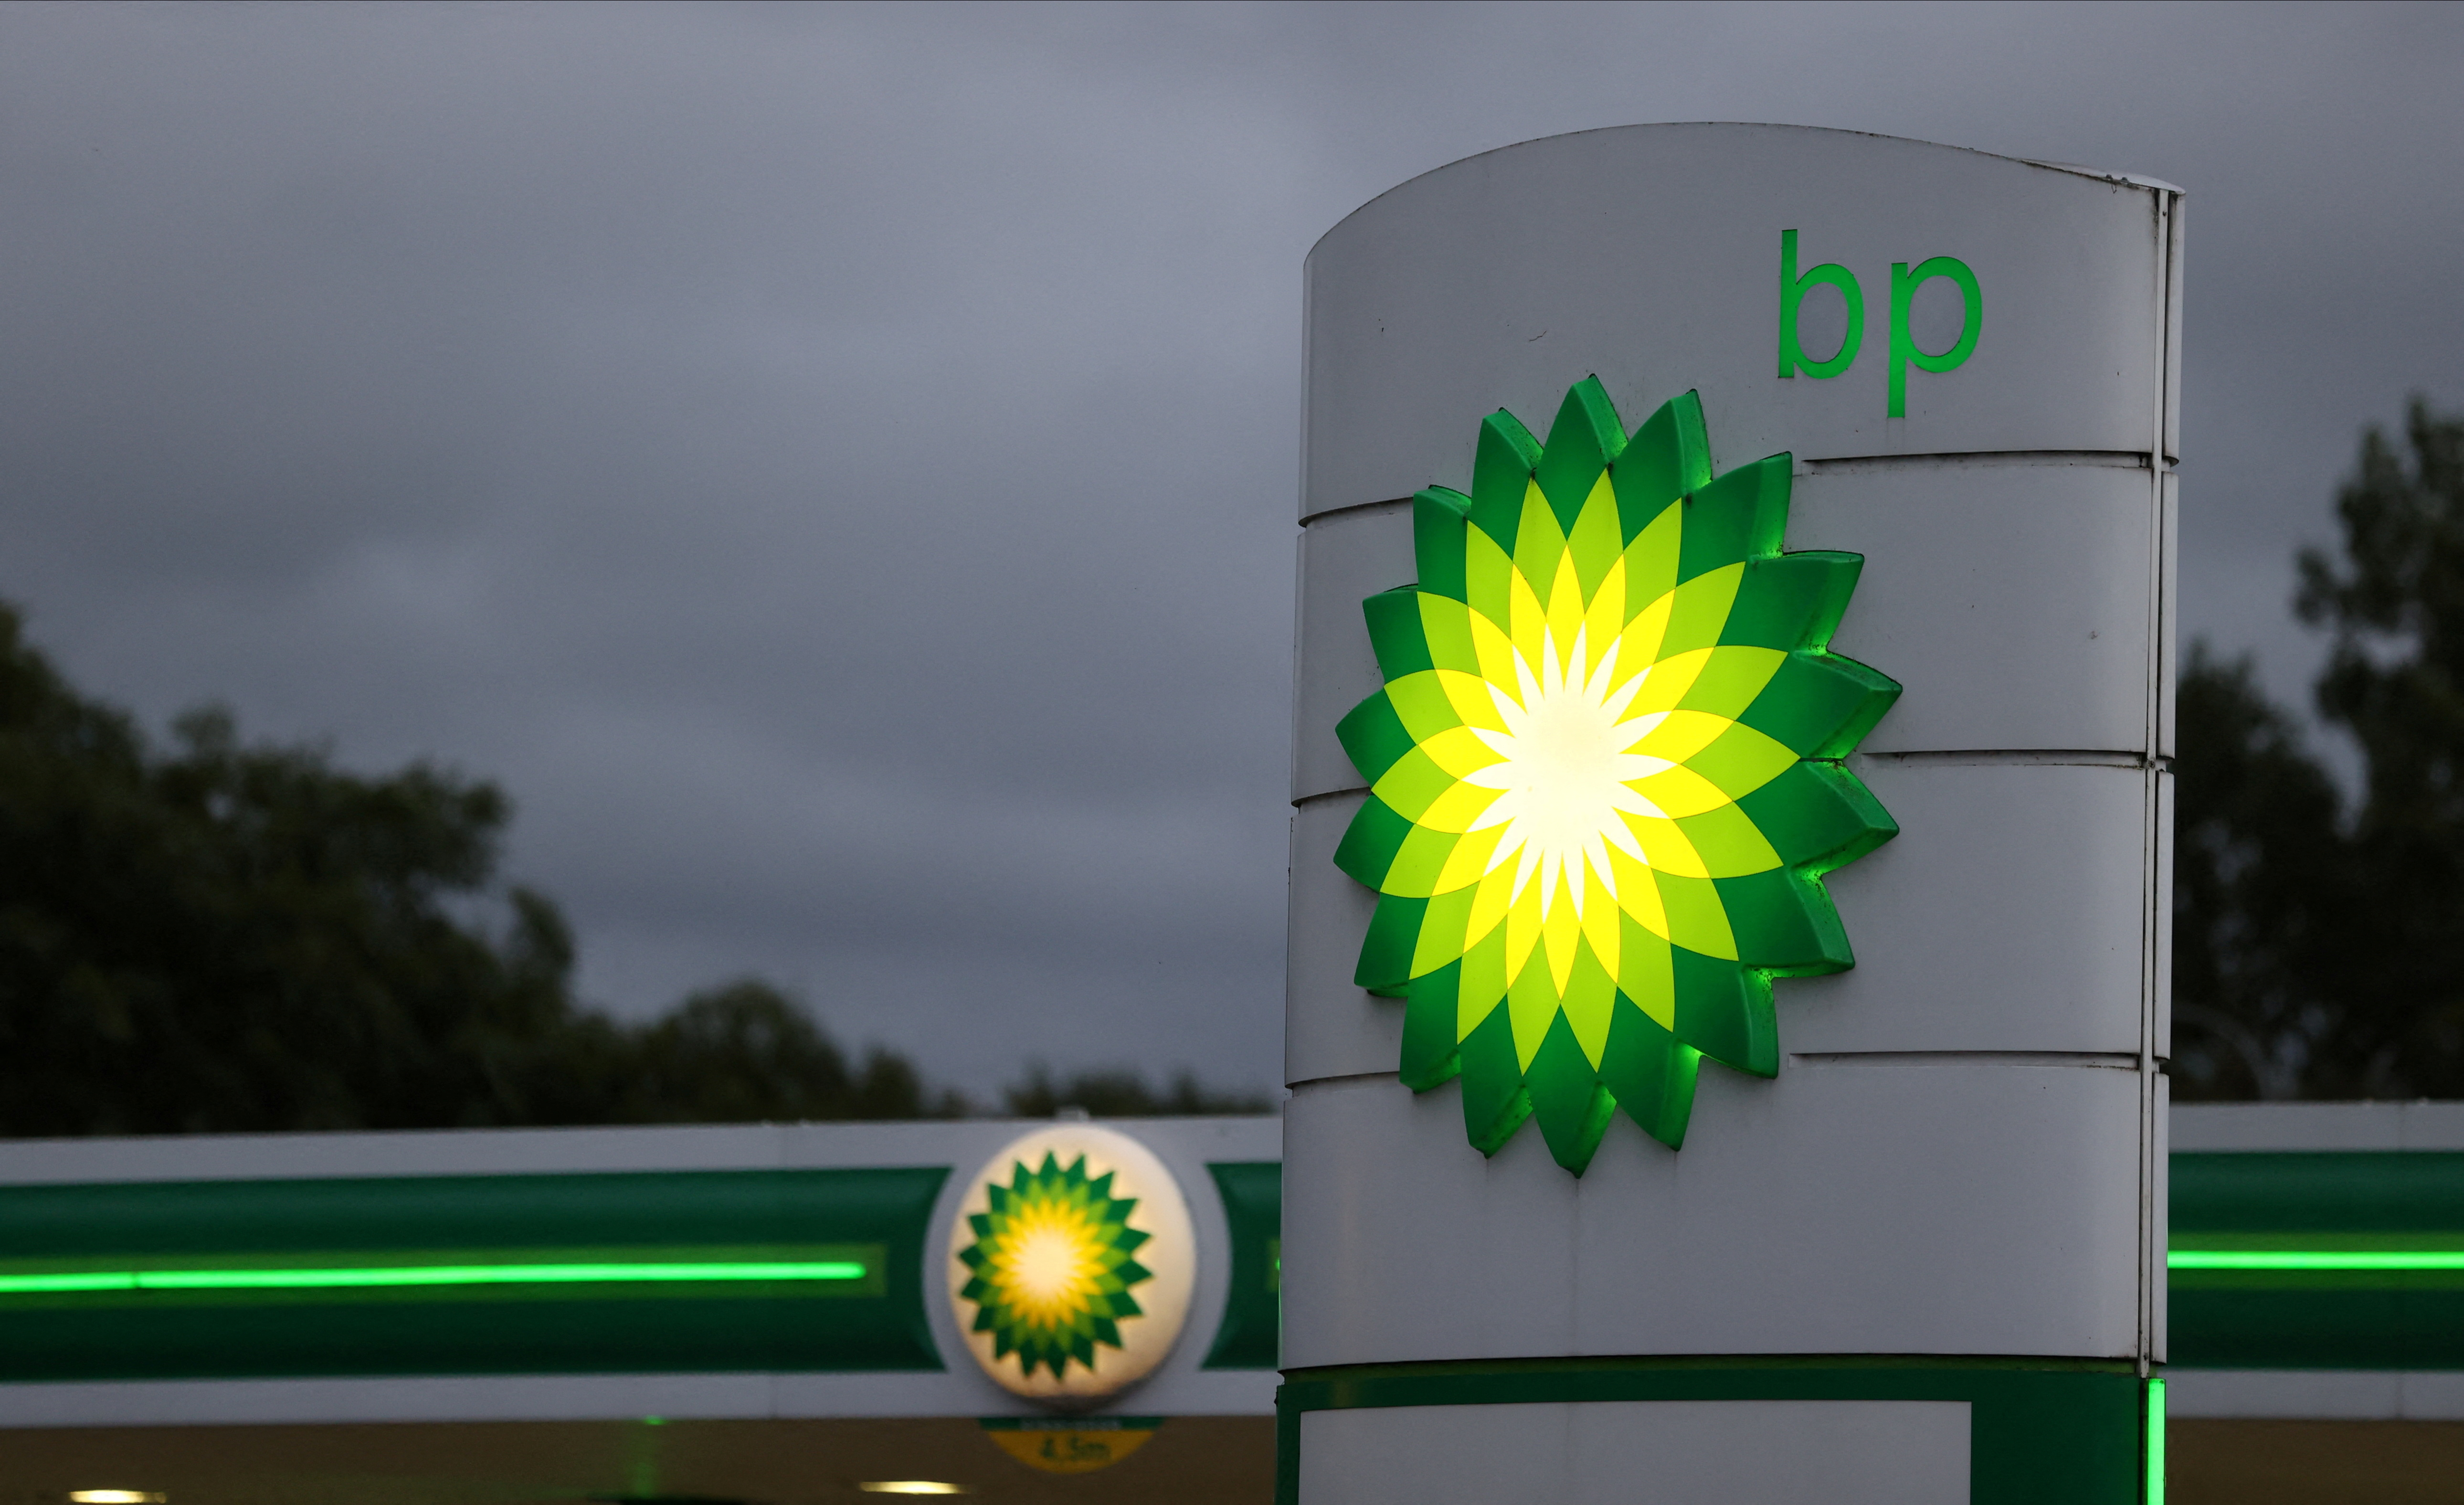 An illuminated BP logo is seen at a petrol station in Chester-le-Street,Durham, Britain September 23, 2021